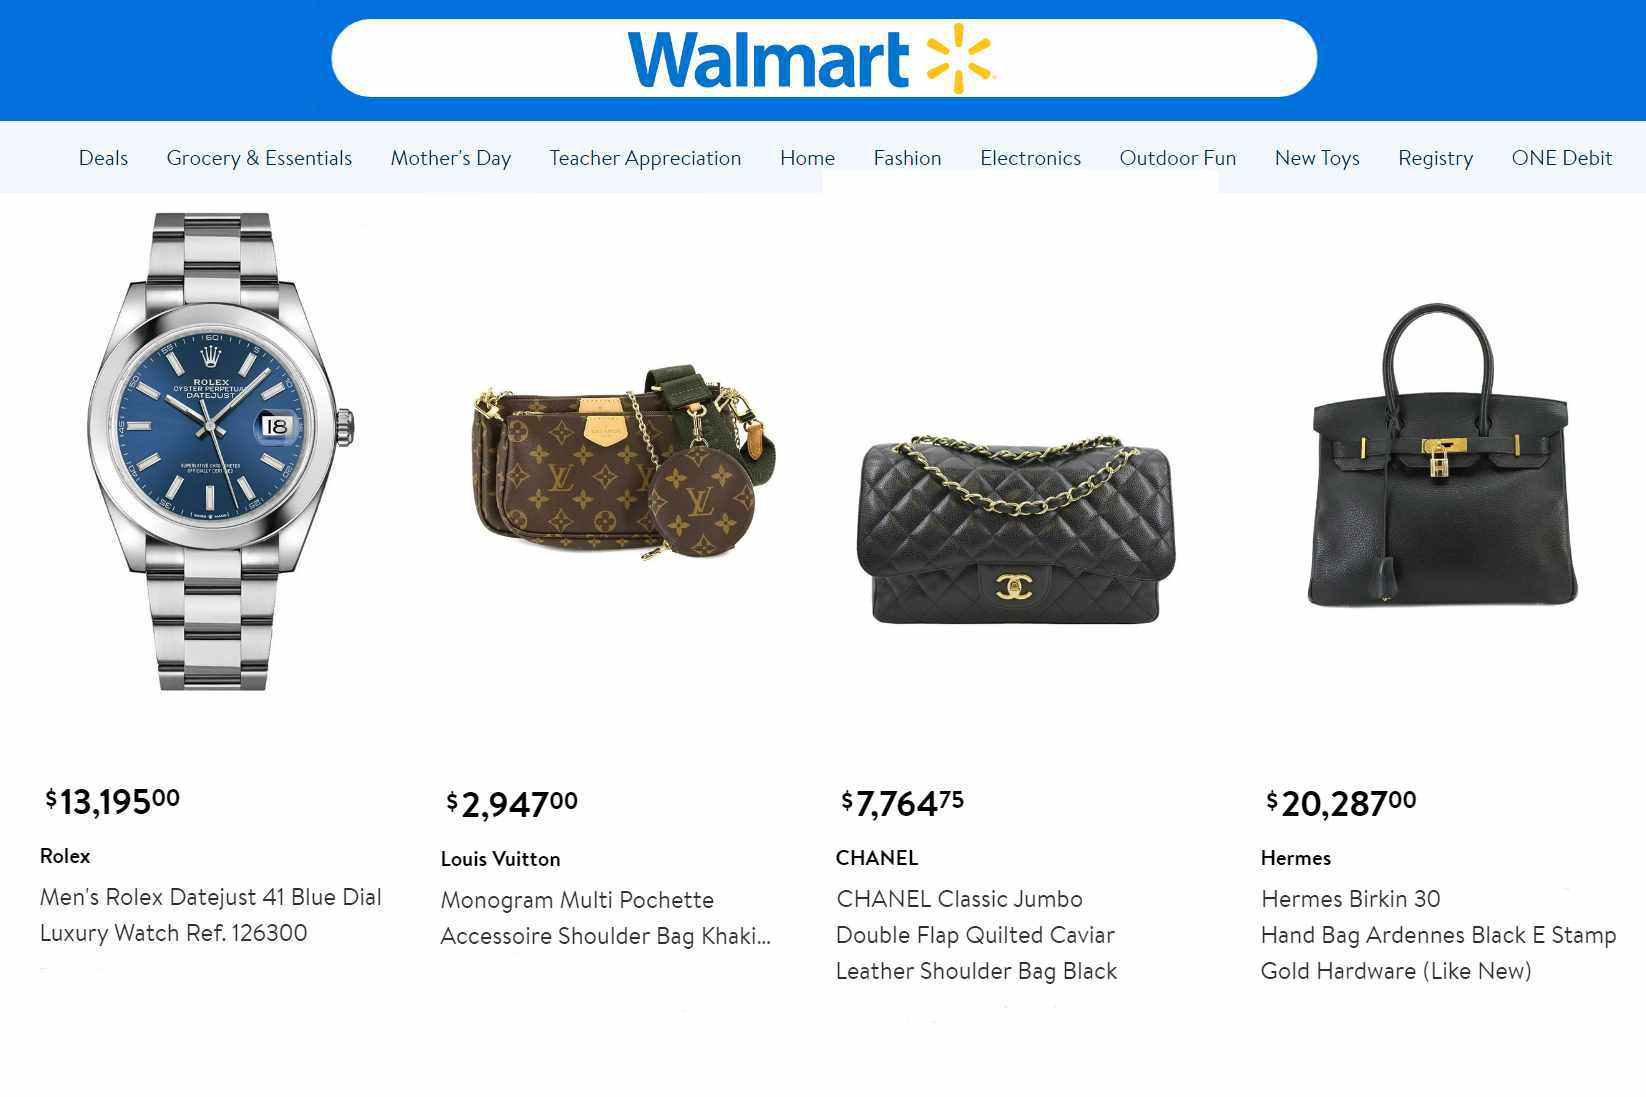 Walmart's website, with hermes birkin bags & rolex watches listed for sale